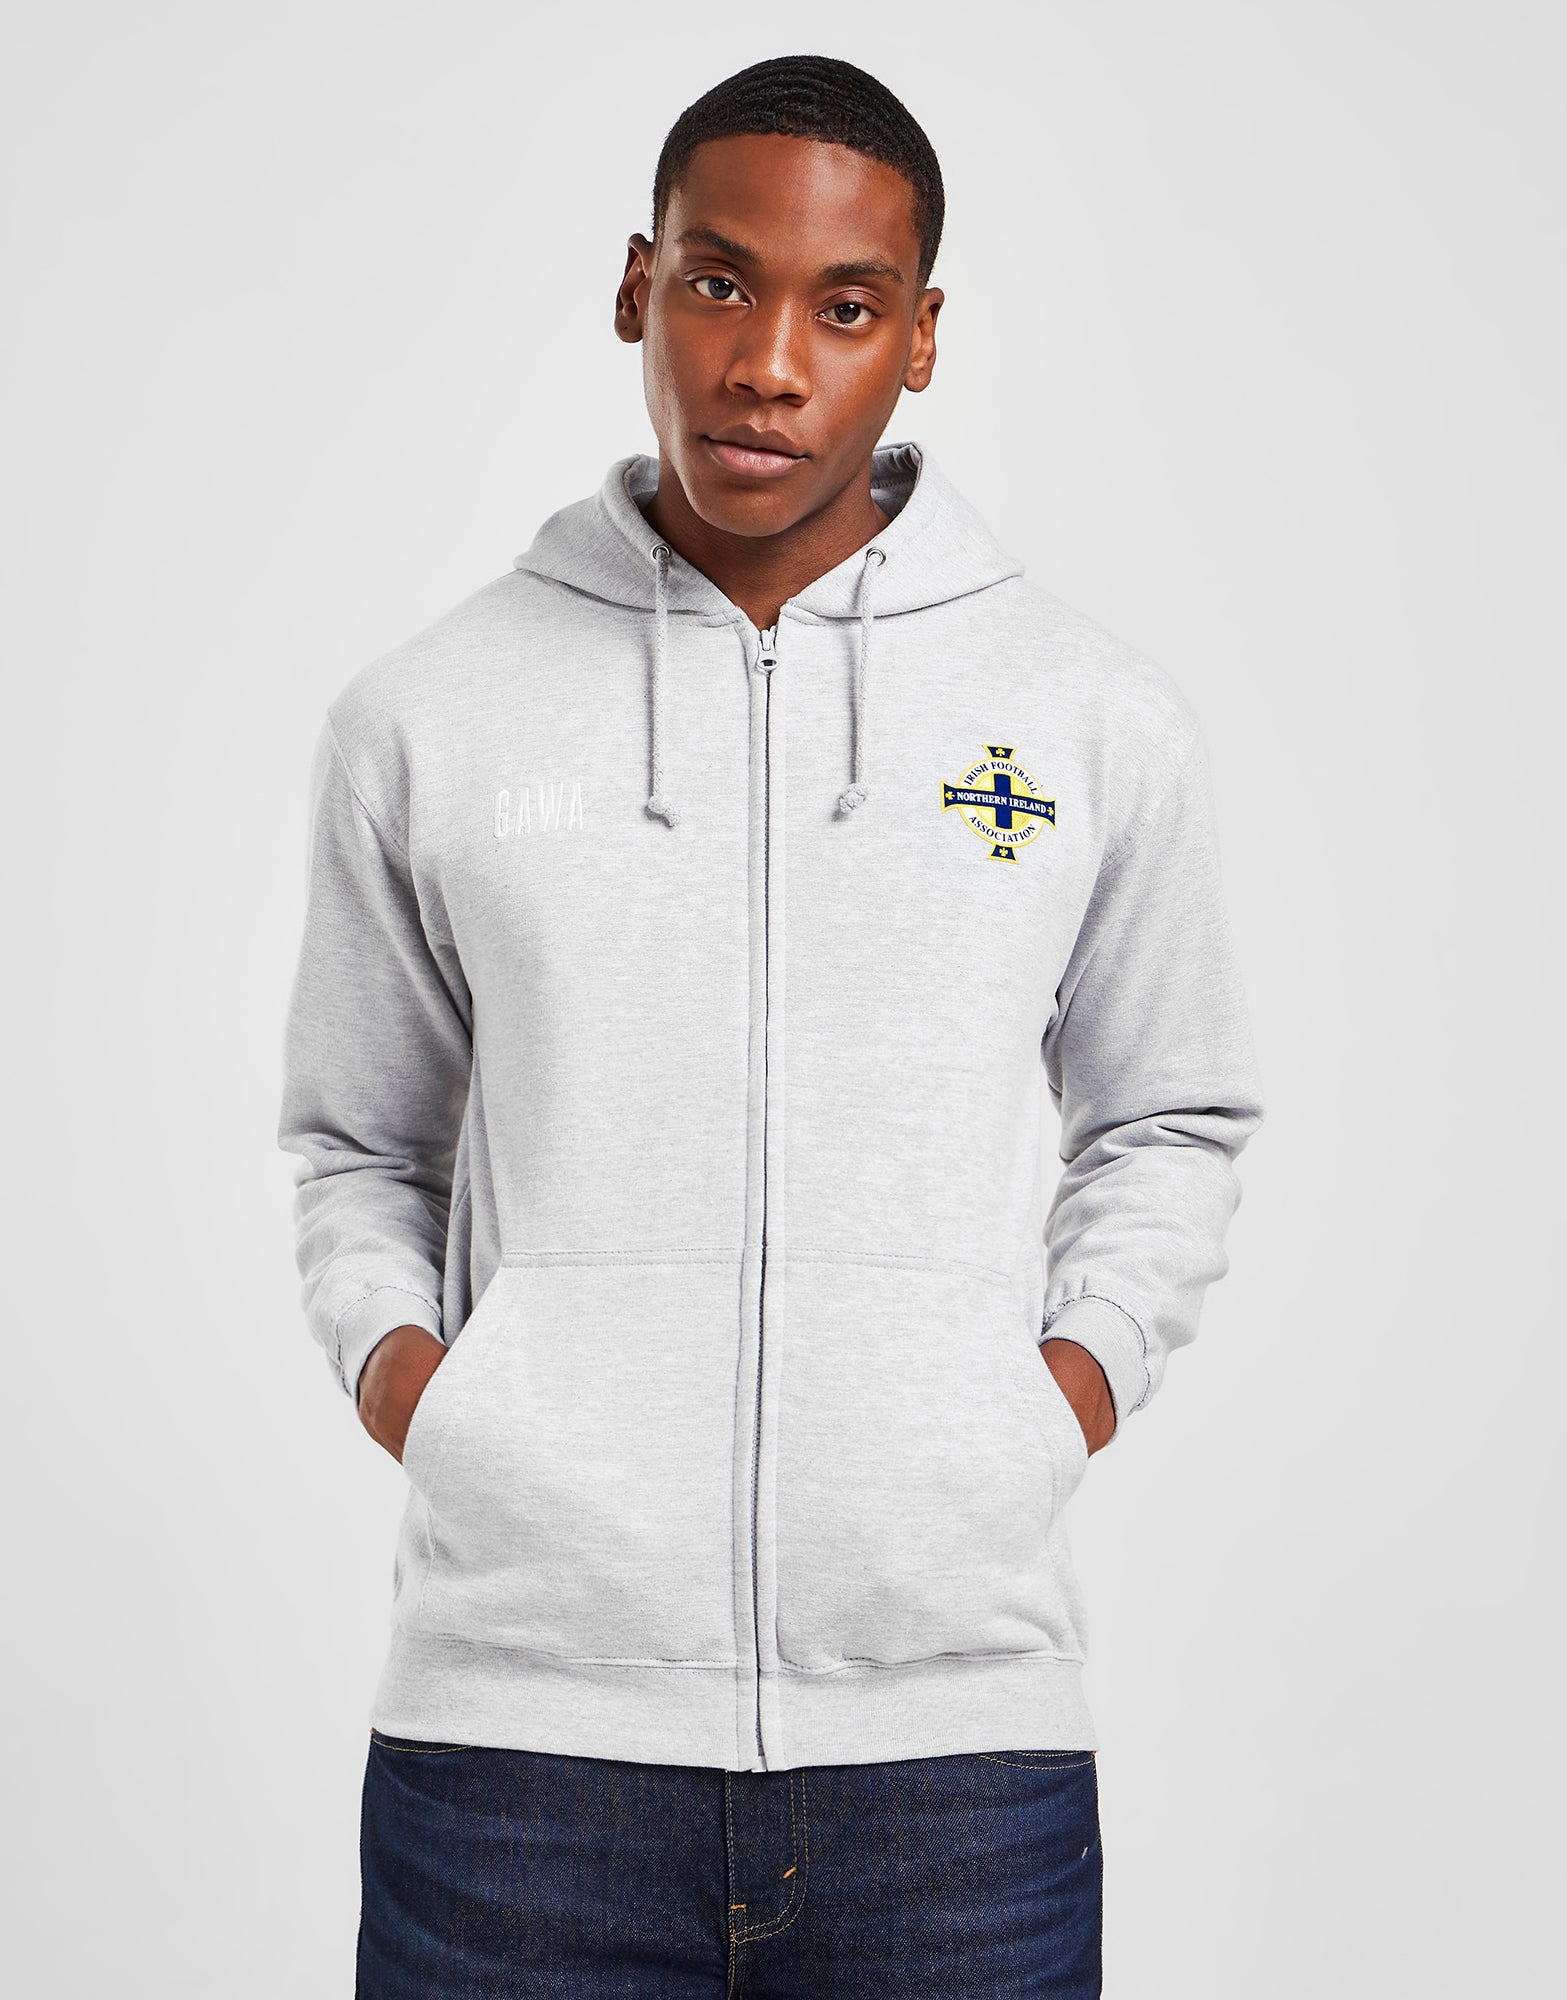 Official Northern Ireland Crest Zip Hoodie - Grey Marl - The World Football Store